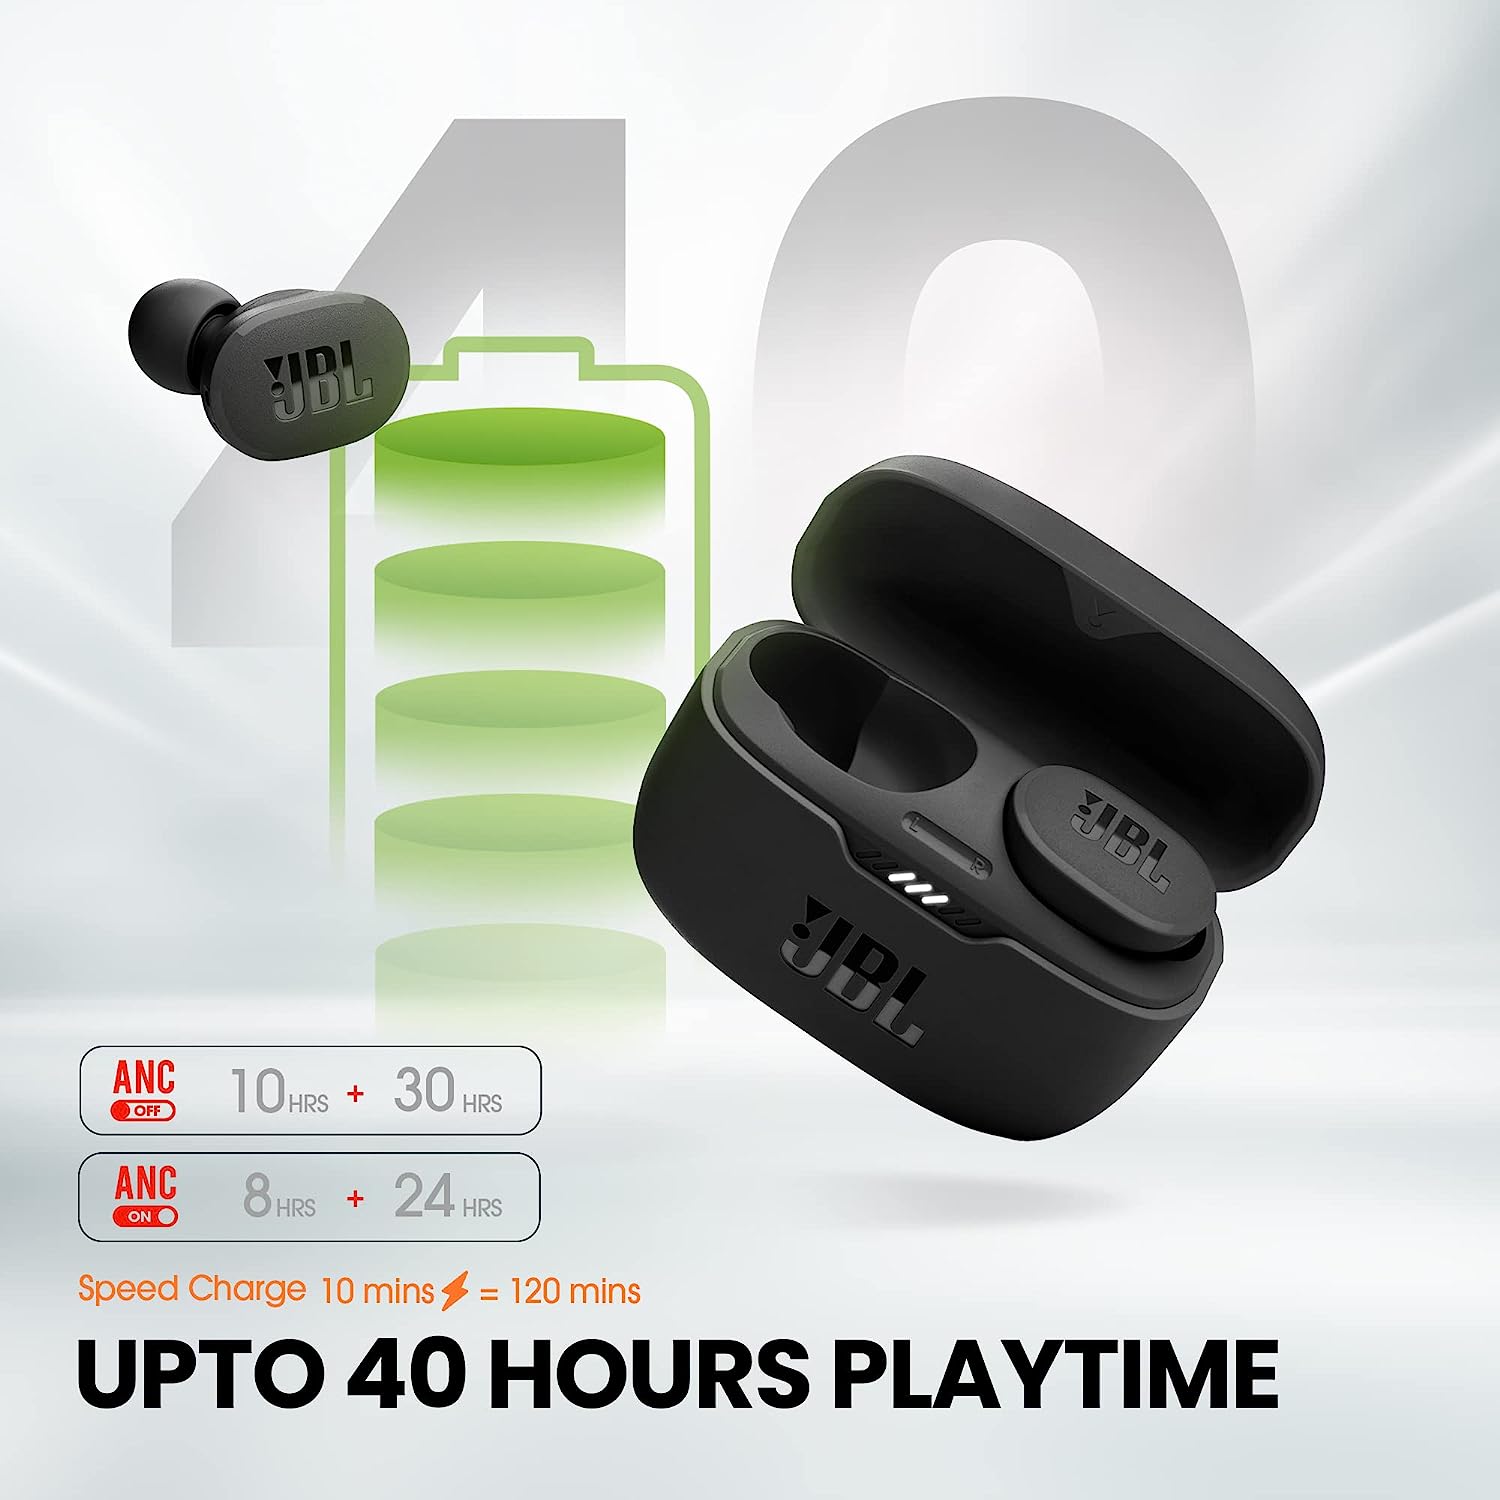 JBL Tune 130NC True Wireless in Ear Earbuds, ANC Earbuds (Upto 40dB) APP –  Adjust EQ for Extra Bass, Massive 40Hrs Playtime, Legendary Sound, 4Mics  for Clear Calls